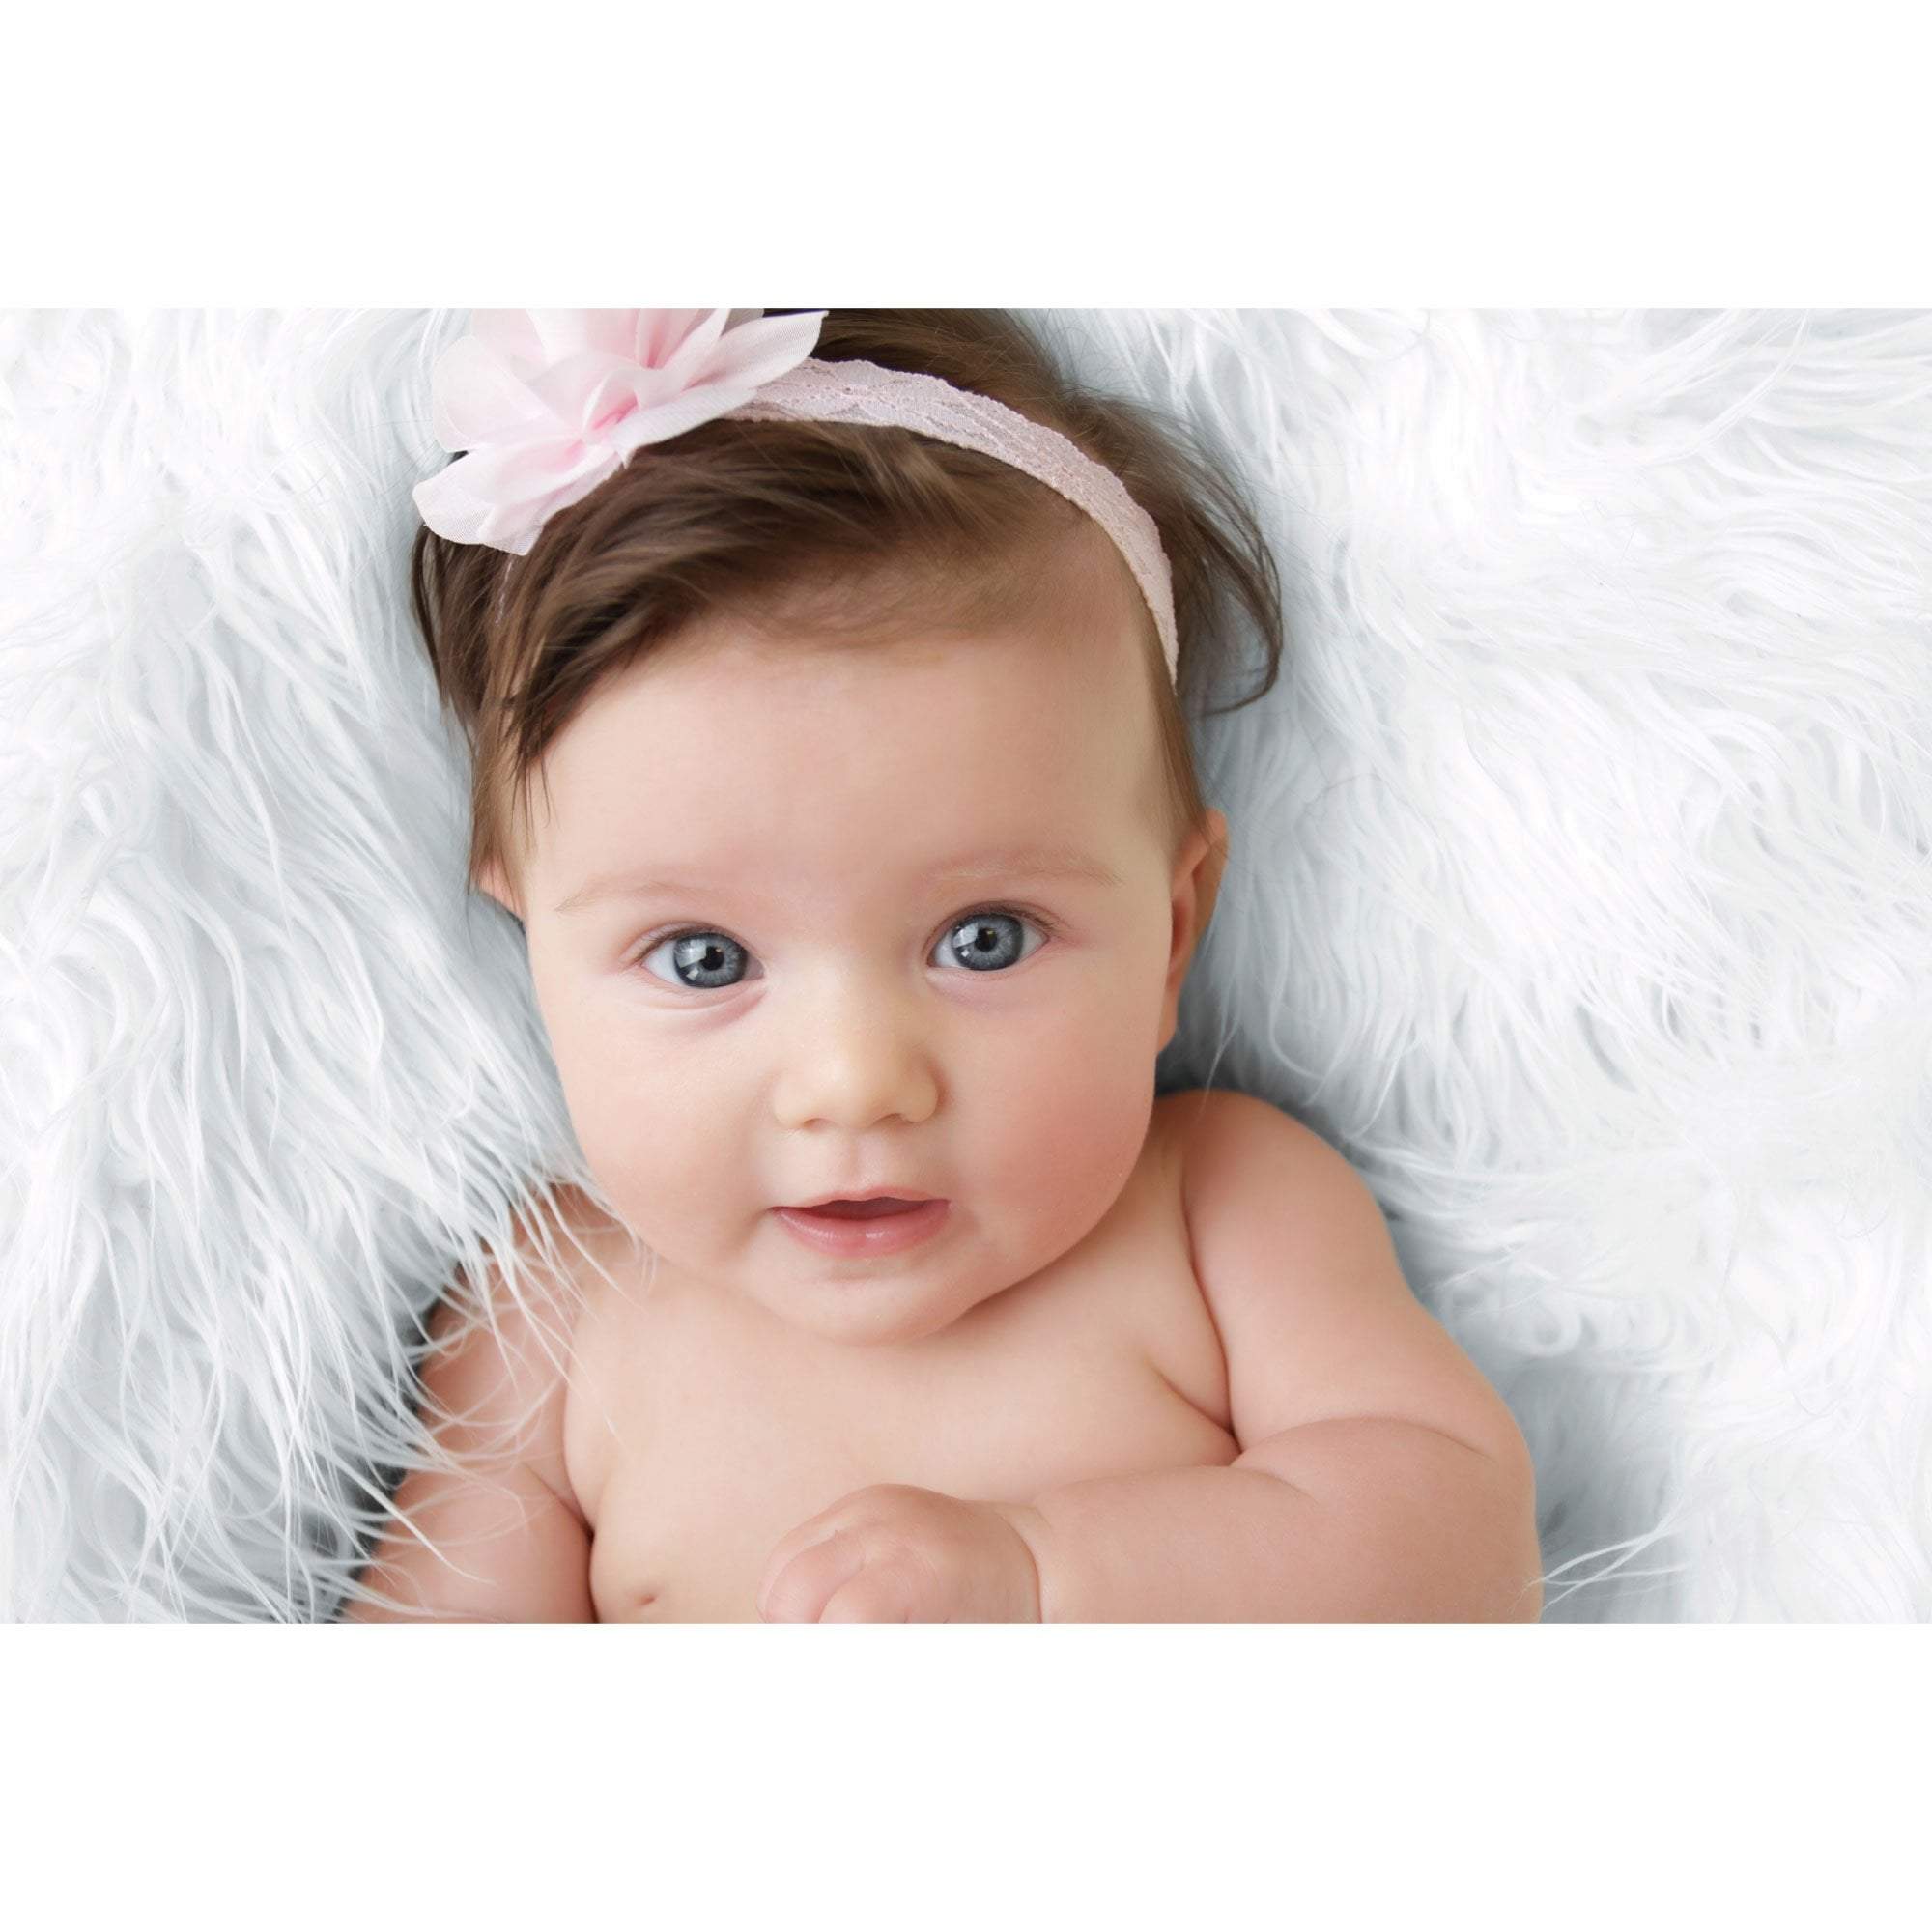 Luxury Faux Fur Baby Blanket  - White - For Your Little One